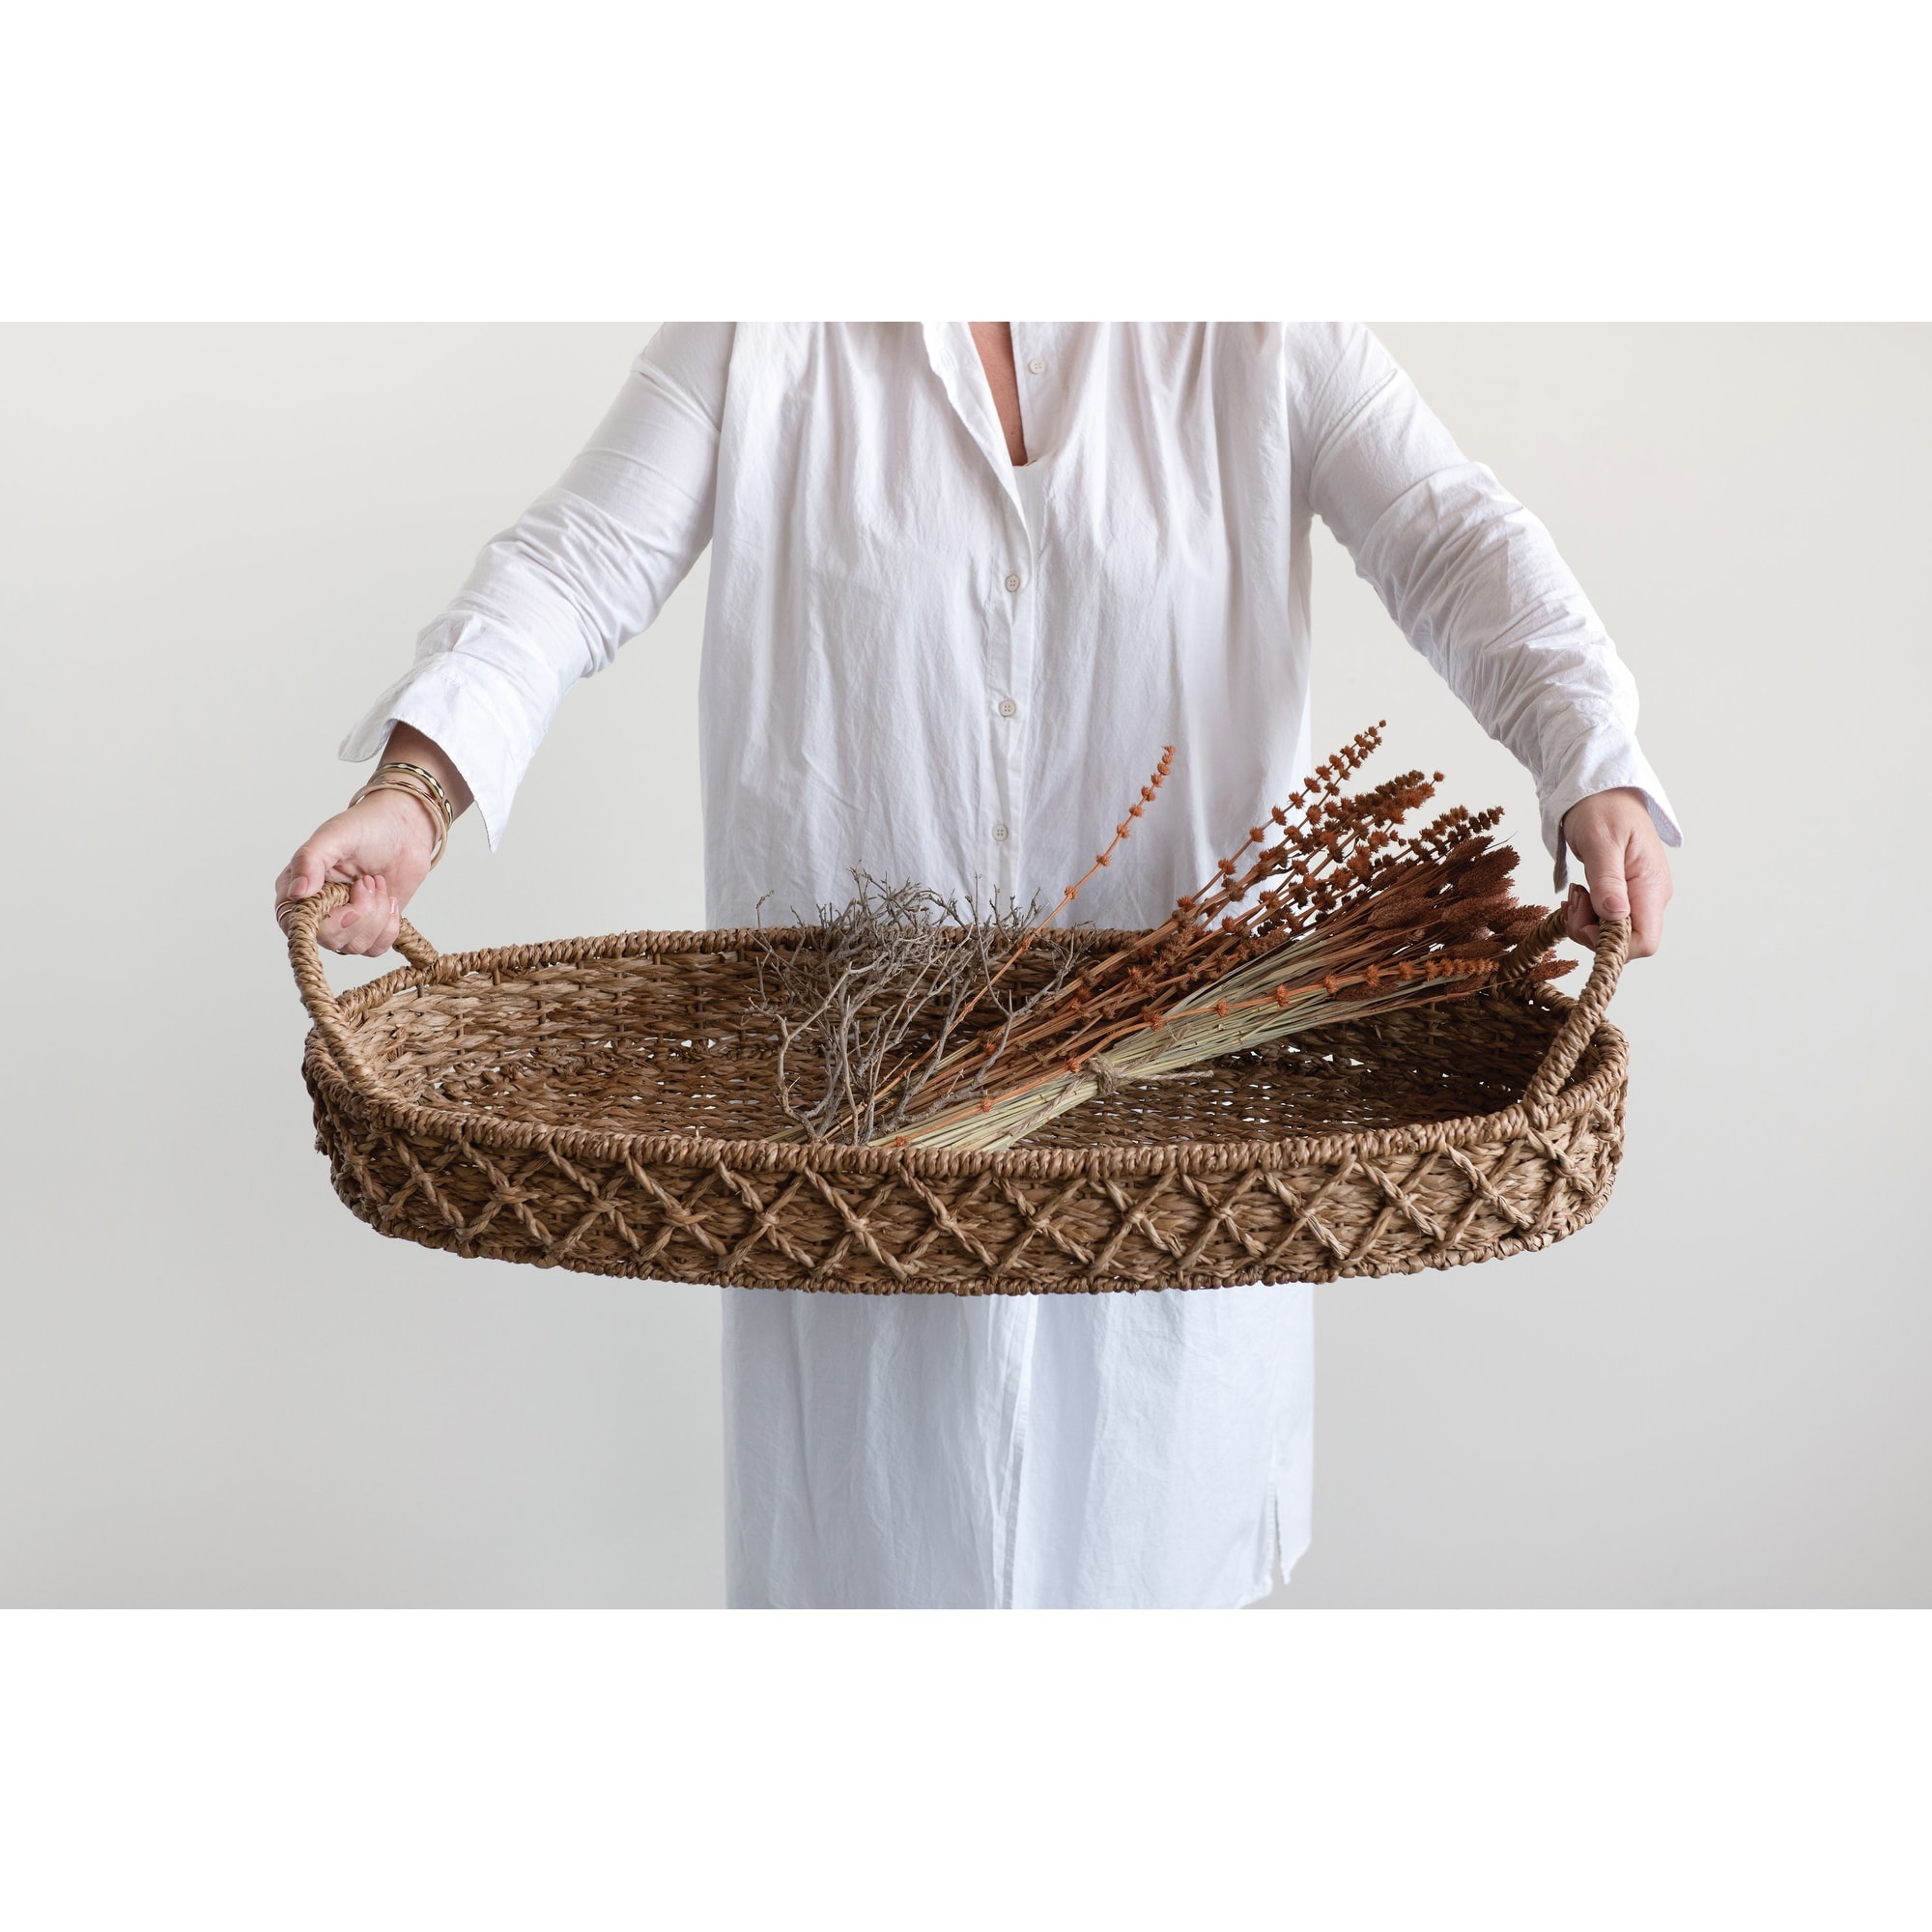 Small Seagrass Oval Basket - The Good Tree